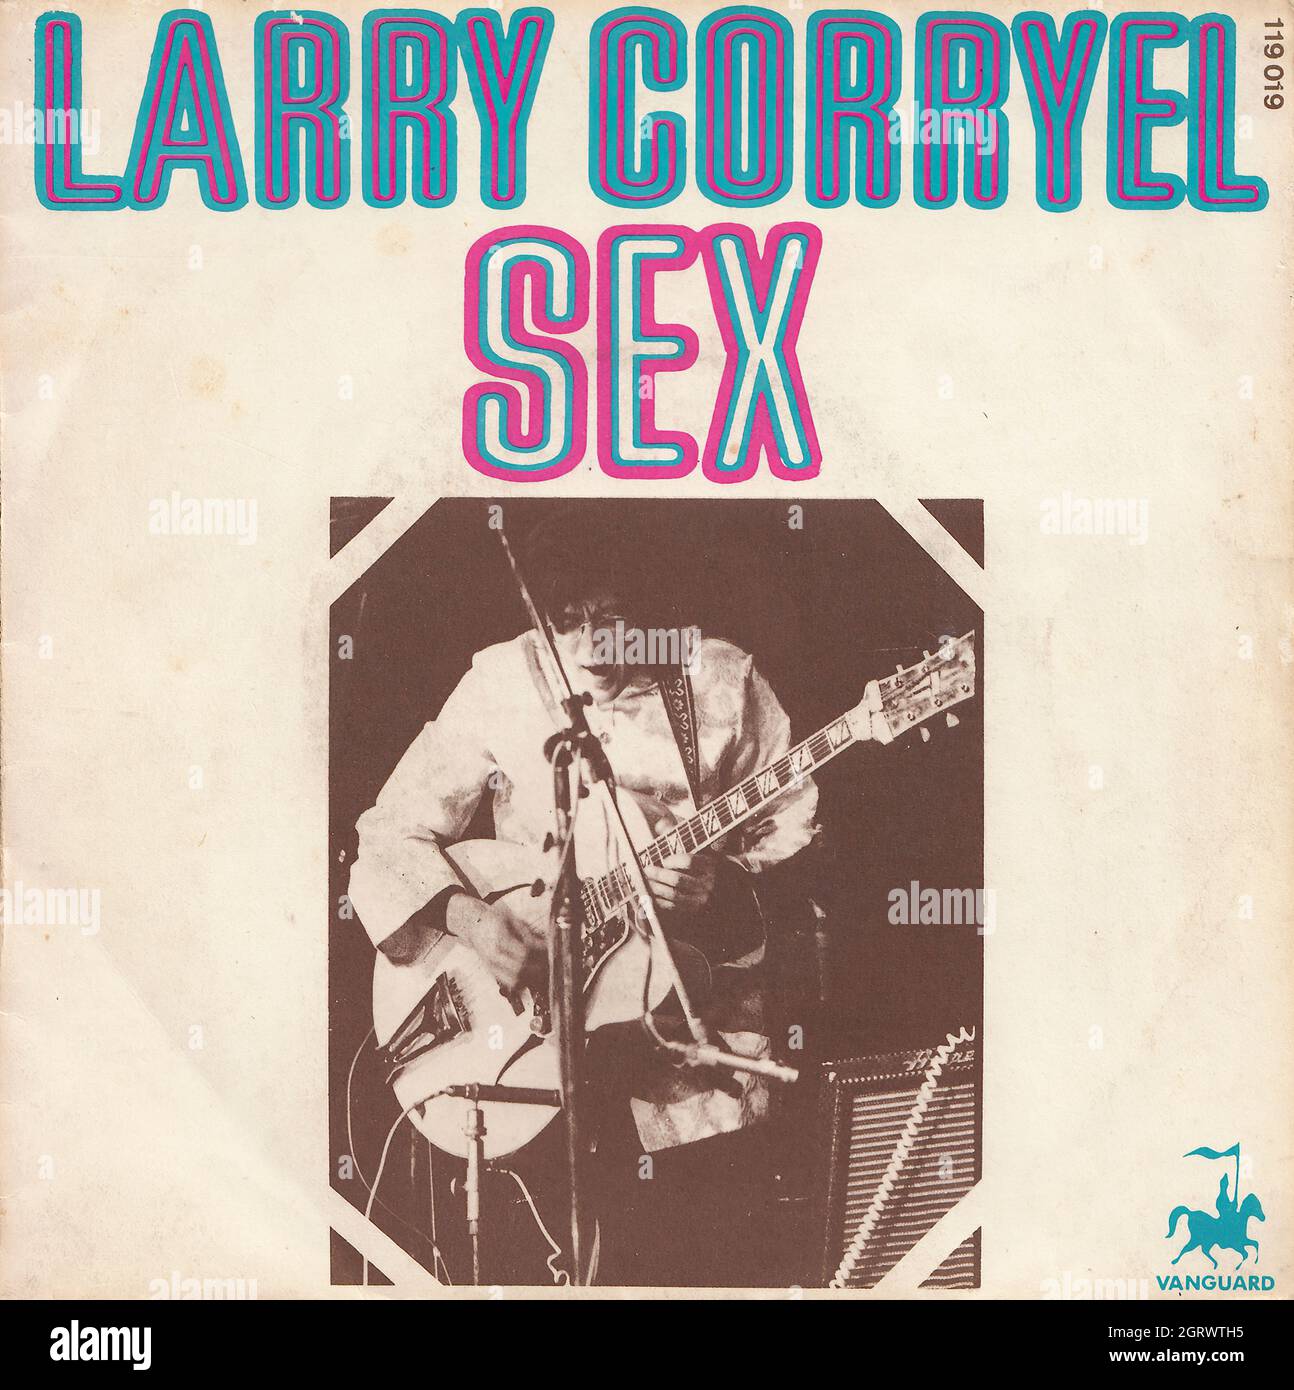 Larry Coryell - Sex - Morning sickness 45rpm - Vintage Vinyl Record Cover Stock Photo